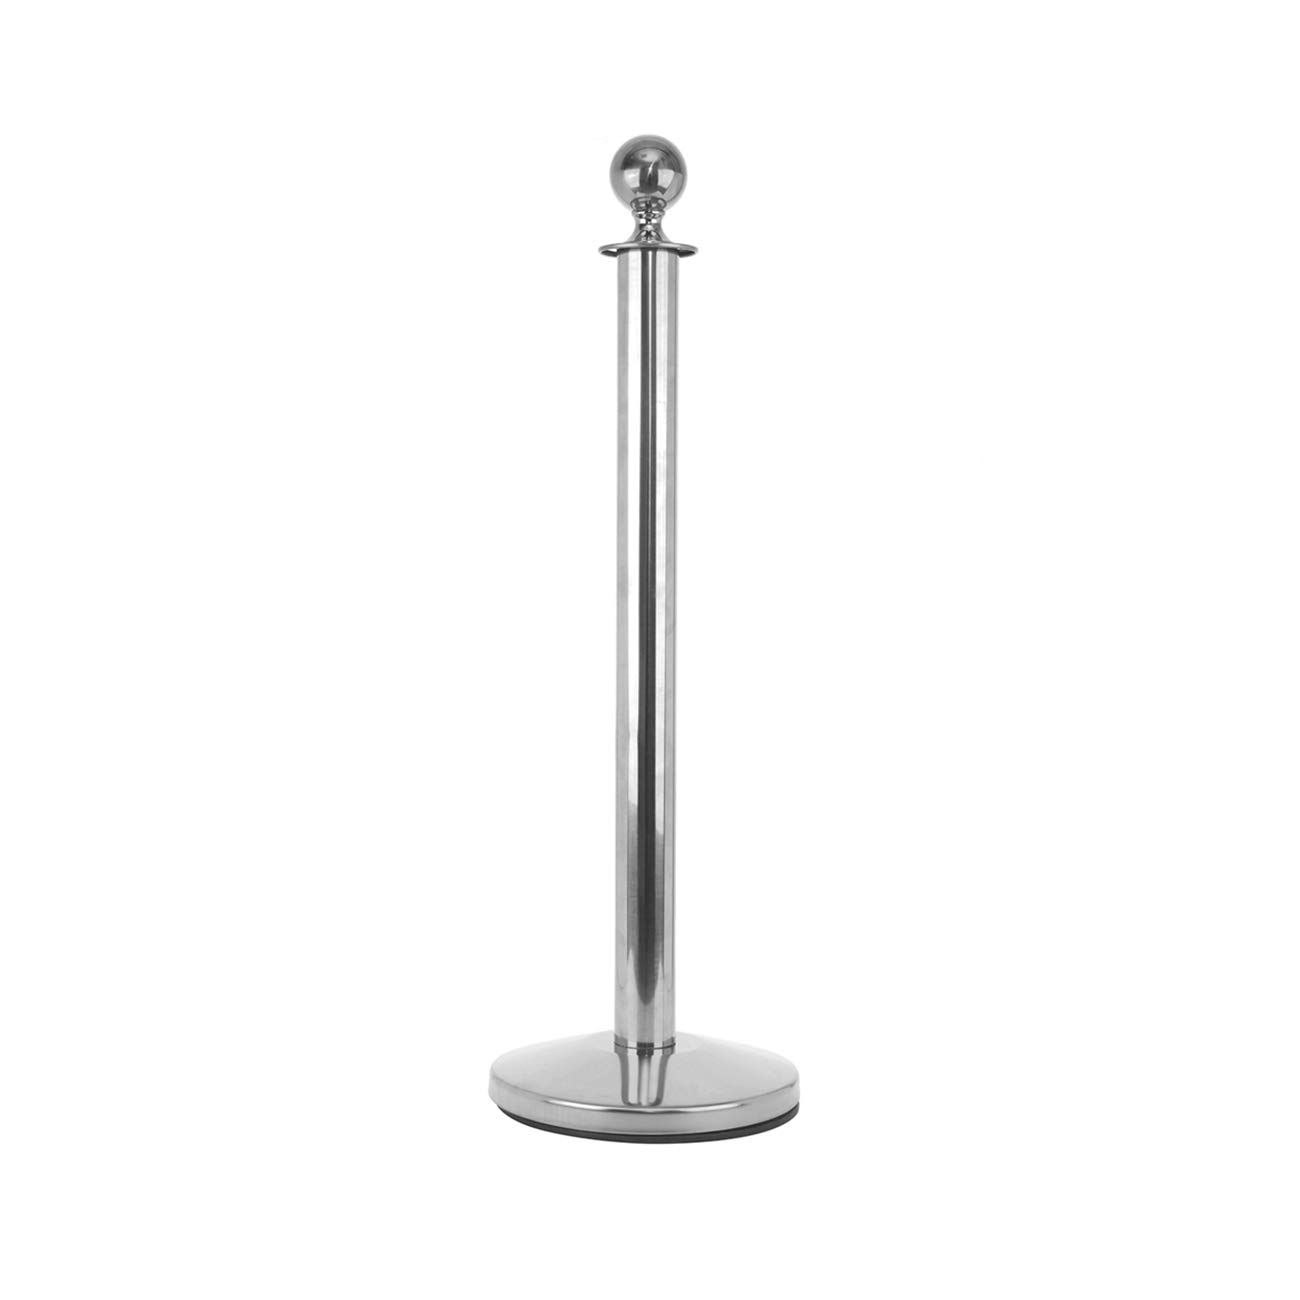 Silver Color Metal Pole For Crowd Control  